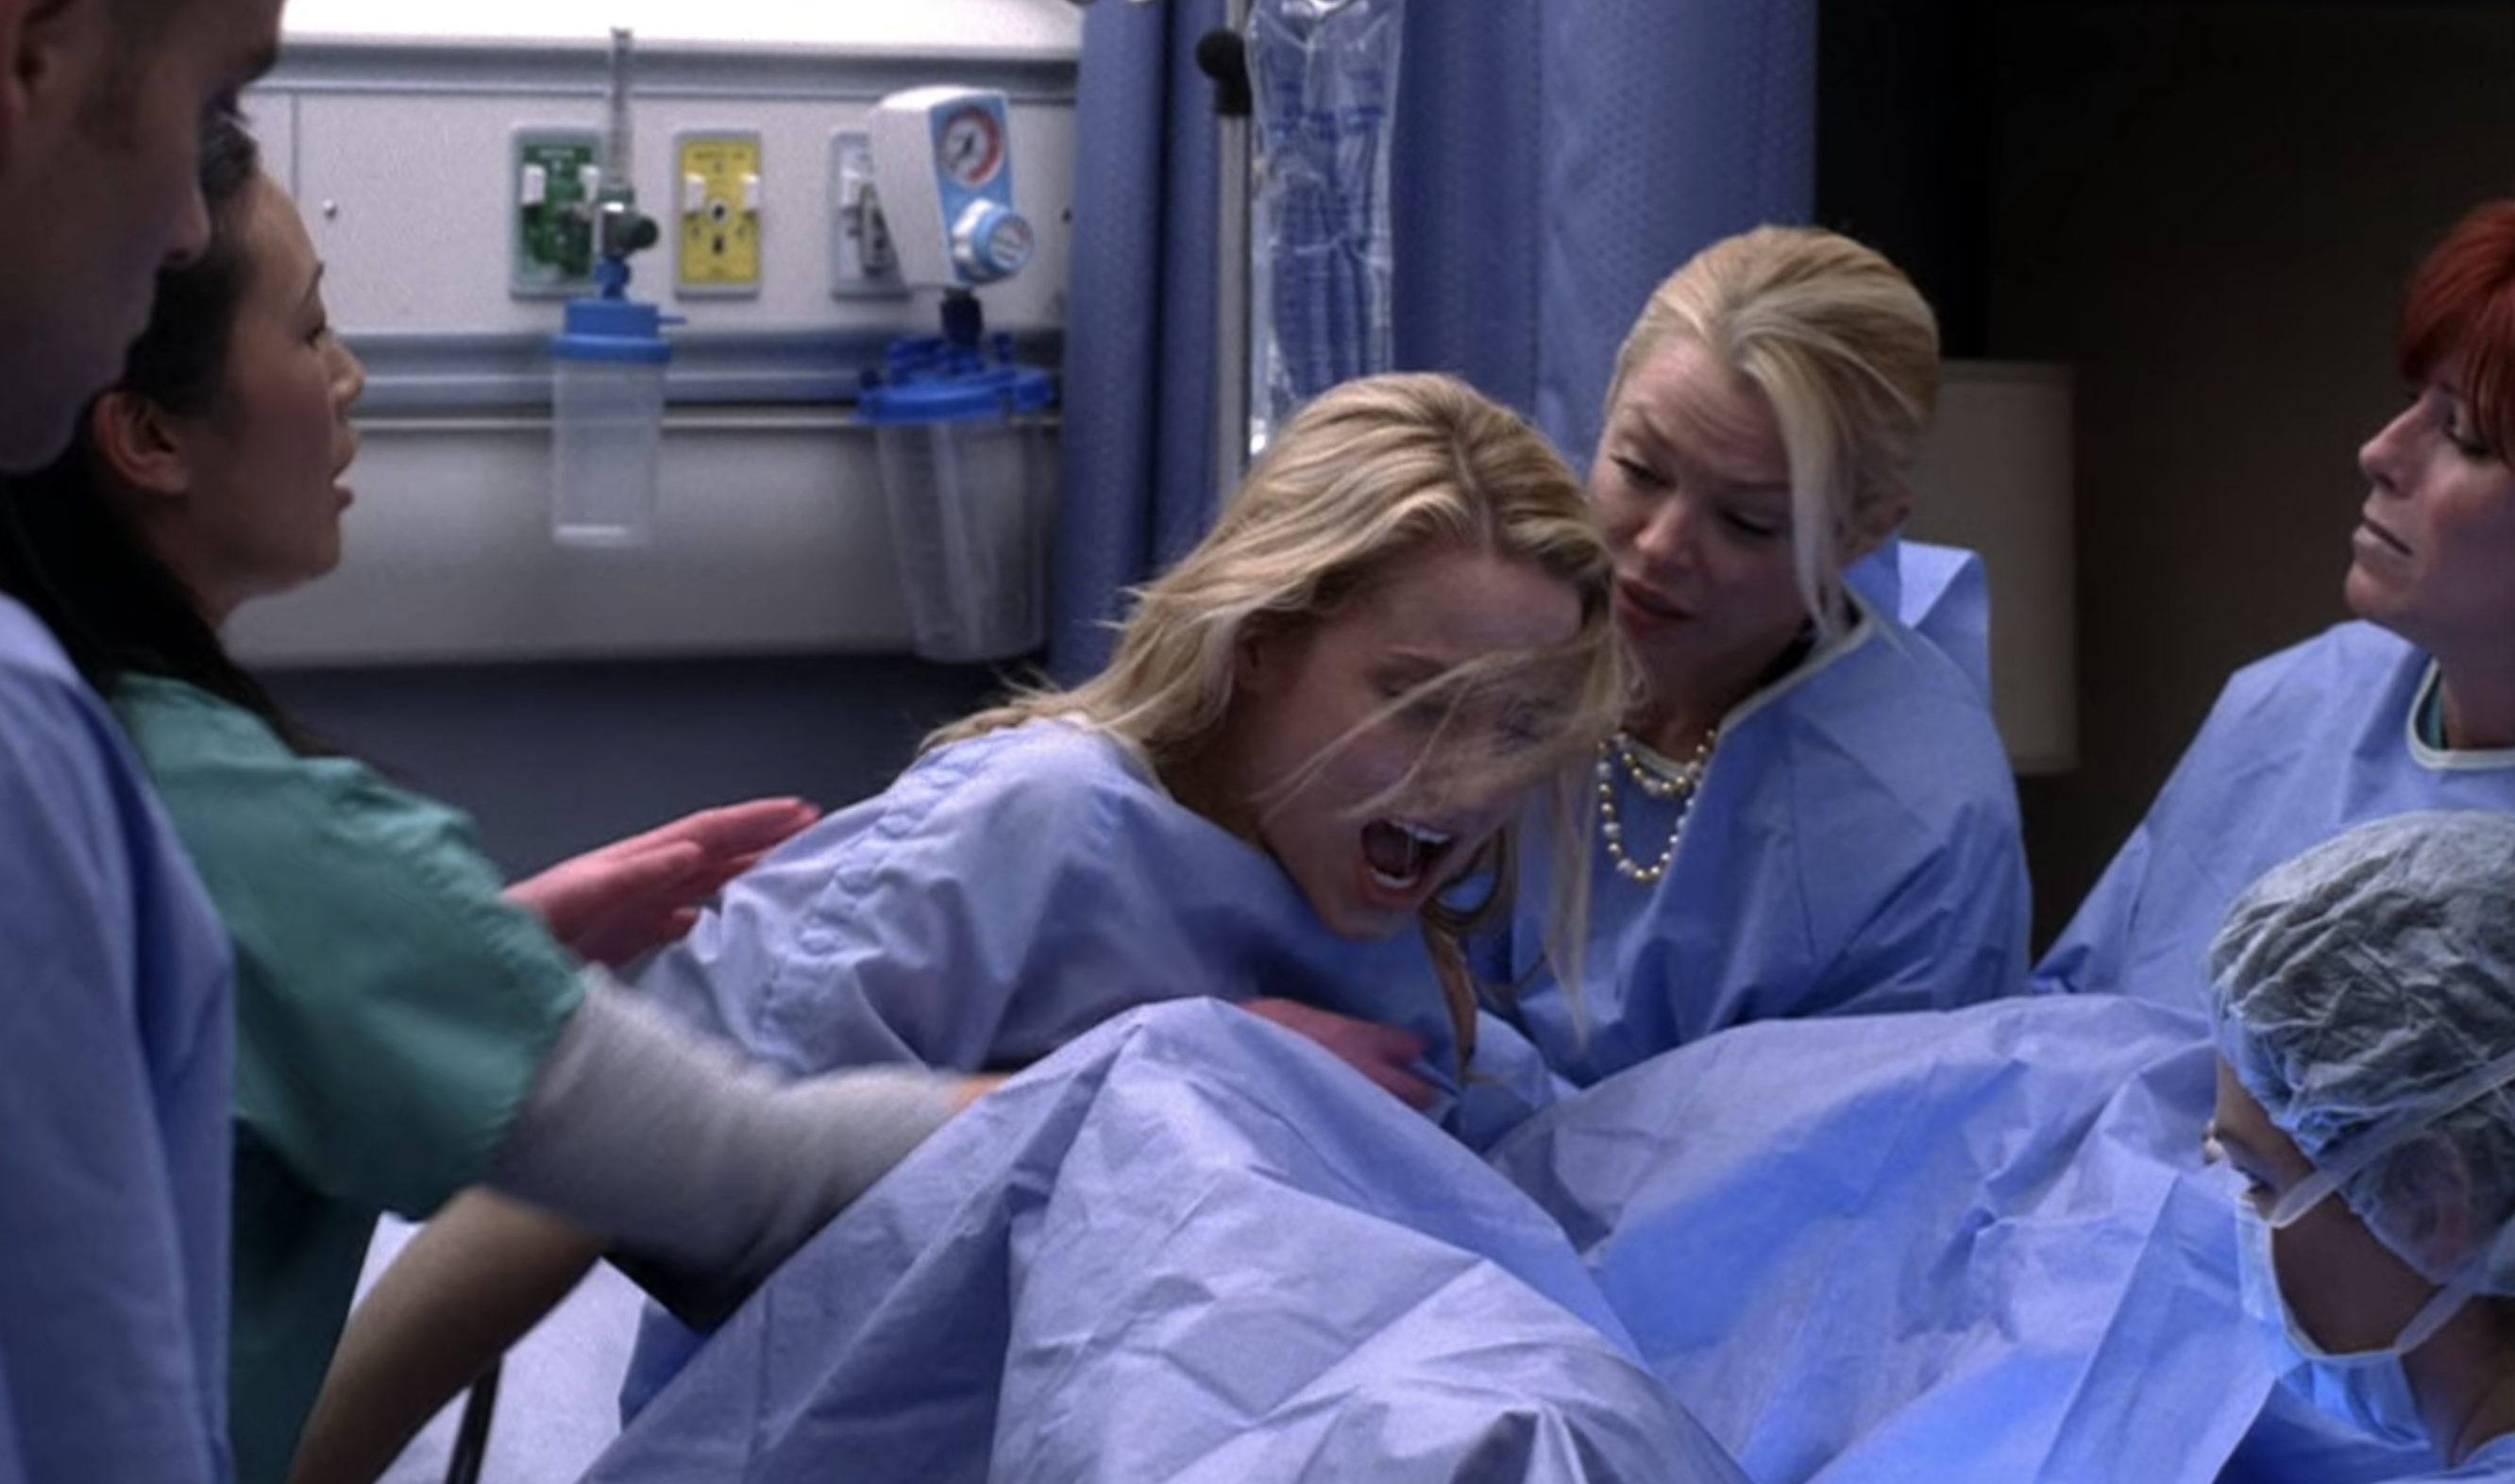 Quinn from &quot;Glee&quot; in labor at the hospital